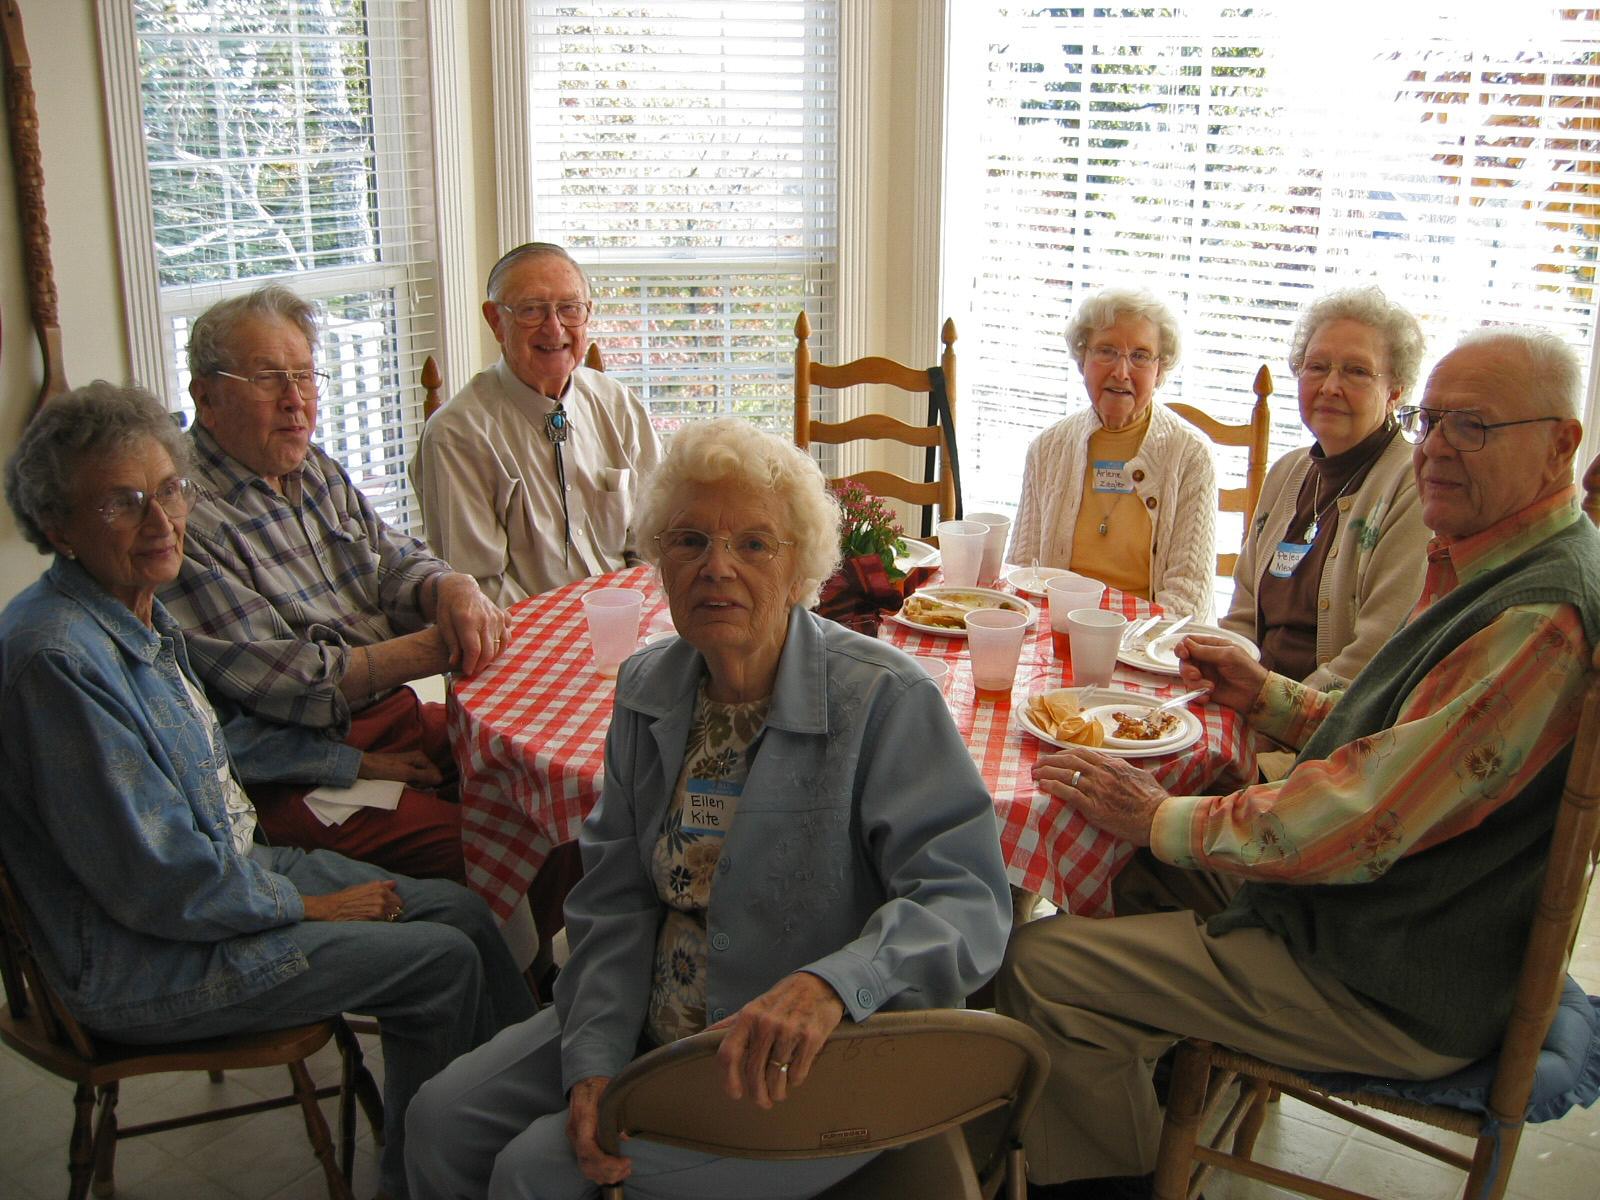 Church members gather around the table for lunch